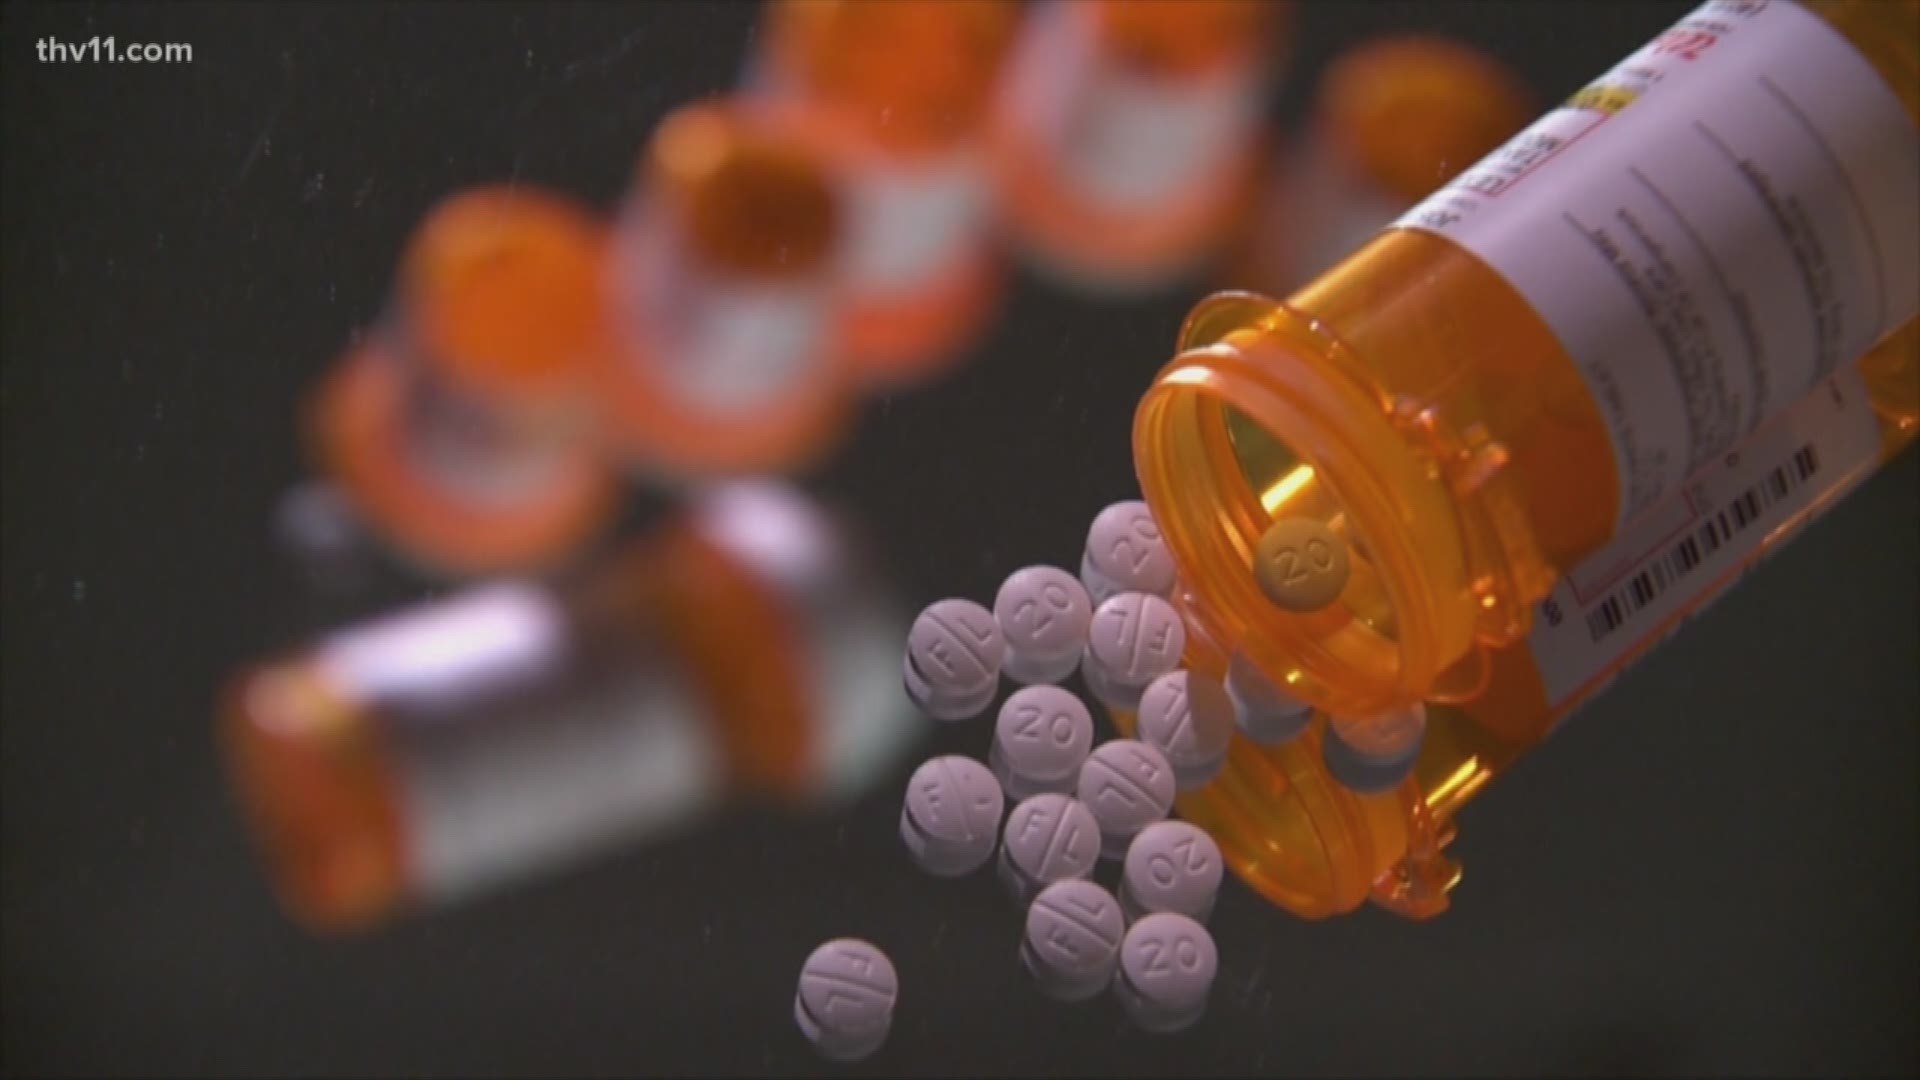 One central Arkansas patient was denied medication at the pharmacy and asked our verify team to find out if new laws are in place that limit the amount of opioids a person can actually get.